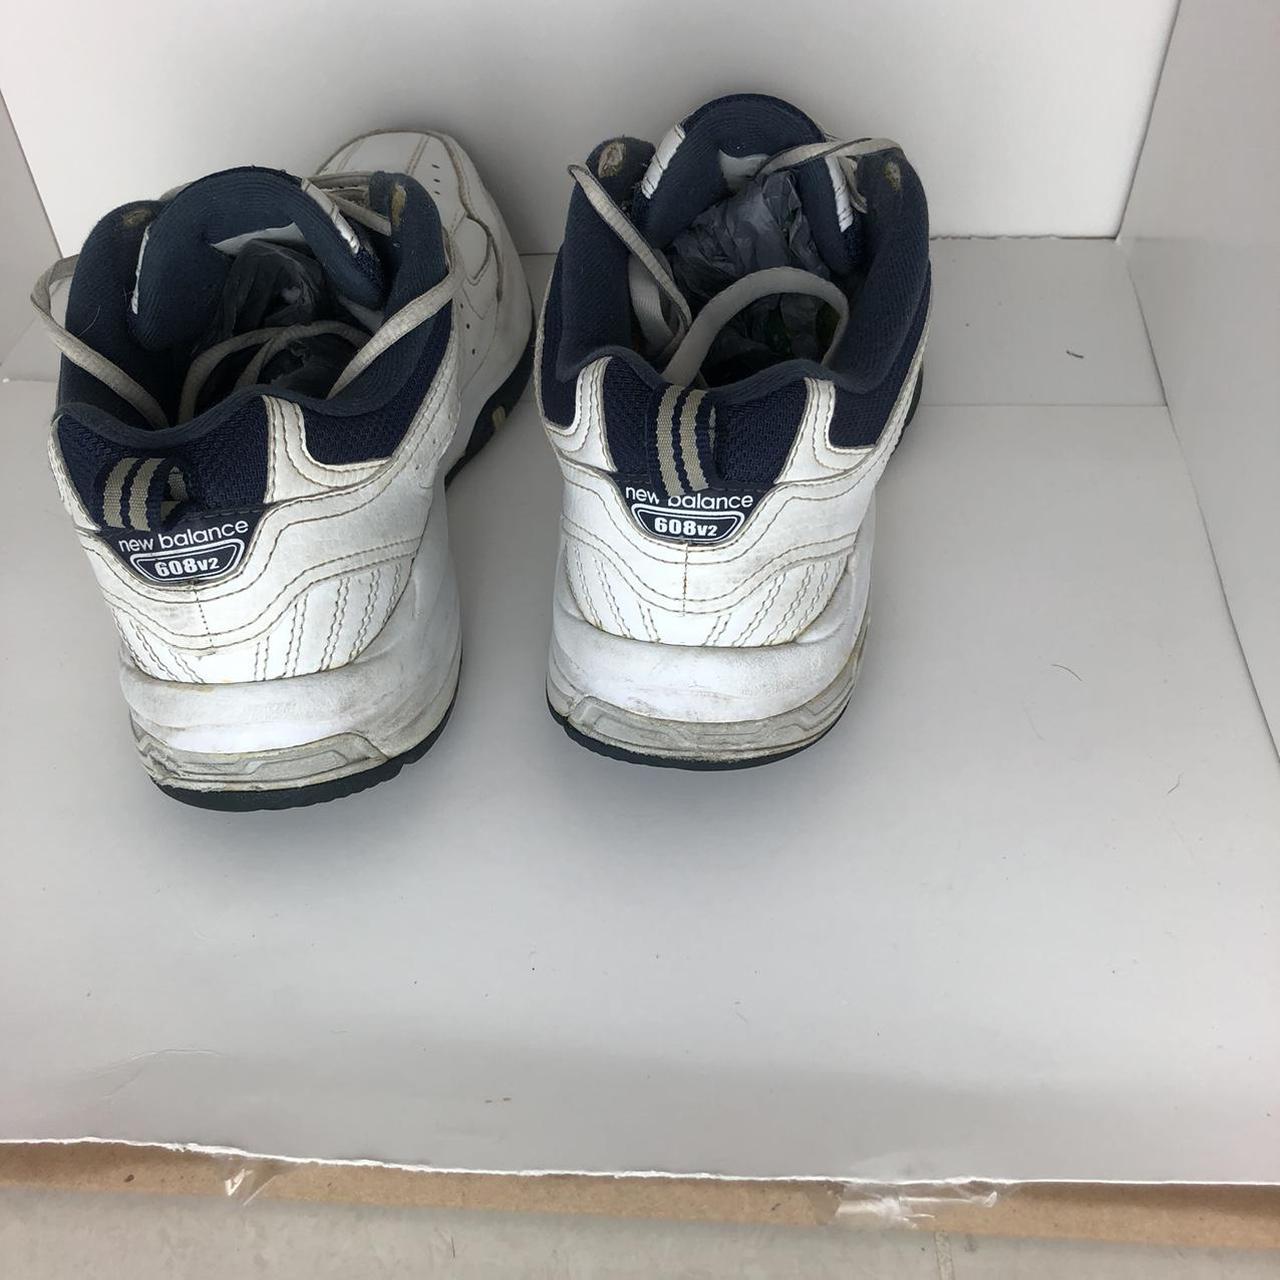 New balance 608 v2 white and navy blue shoes Size... - Depop